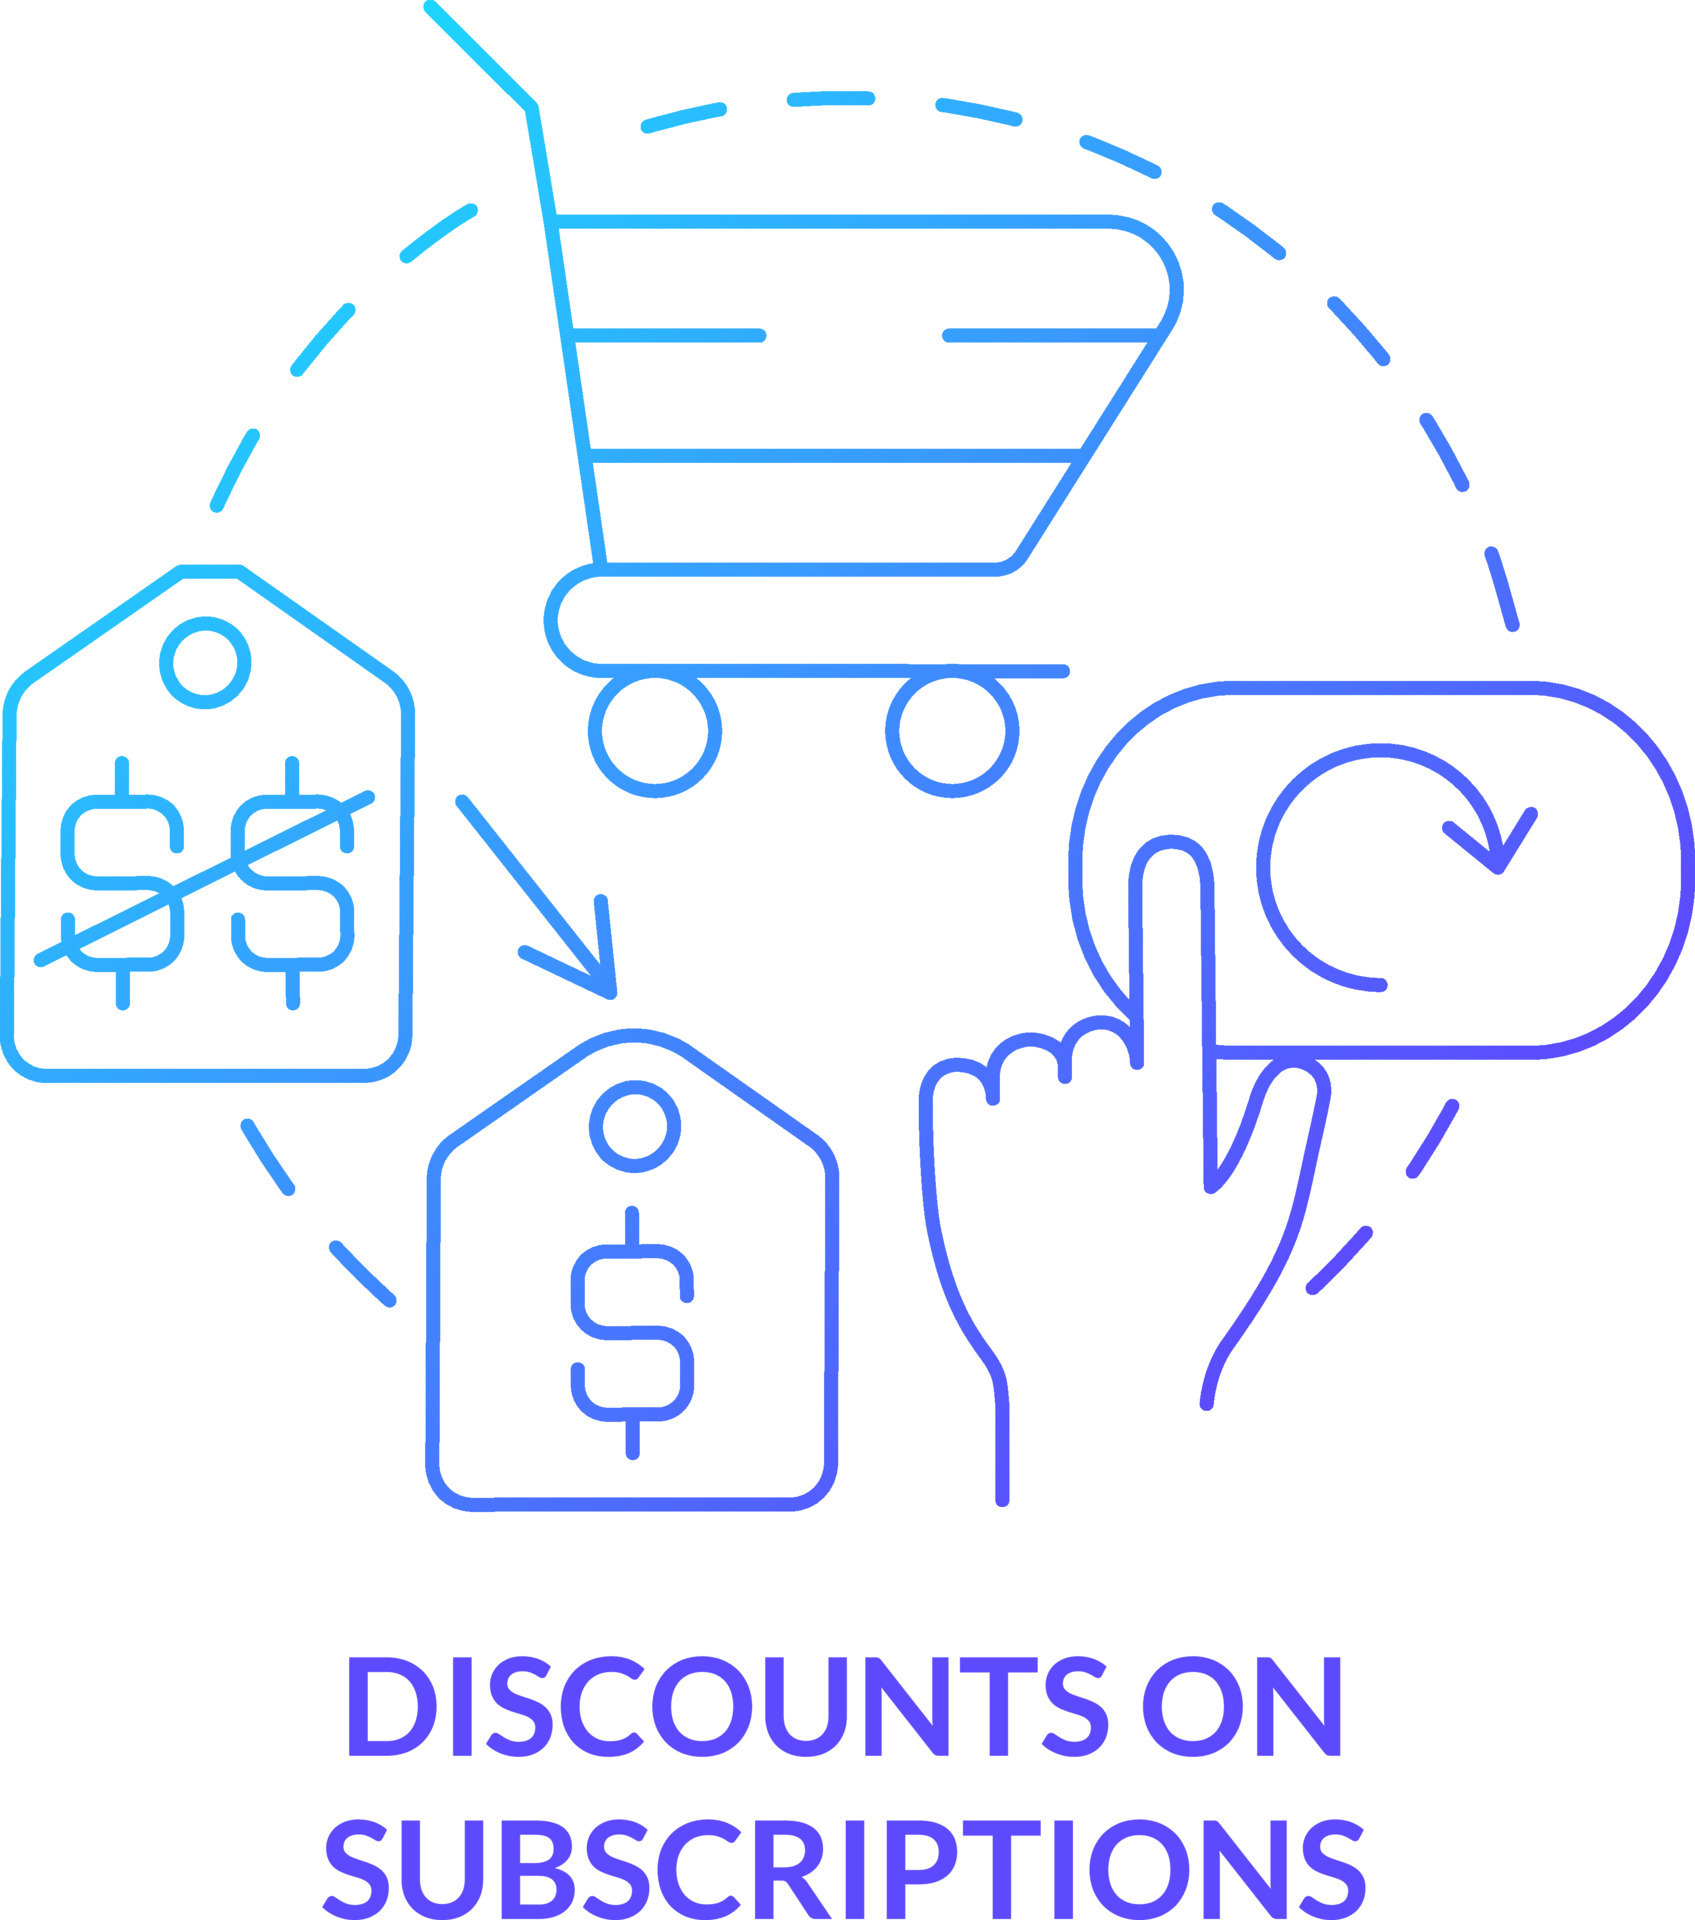 https://static.vecteezy.com/system/resources/previews/021/365/367/original/discounts-on-subscriptions-blue-gradient-concept-icon-incentive-for-customers-marketing-strategy-abstract-idea-thin-line-illustration-isolated-outline-drawing-vector.jpg